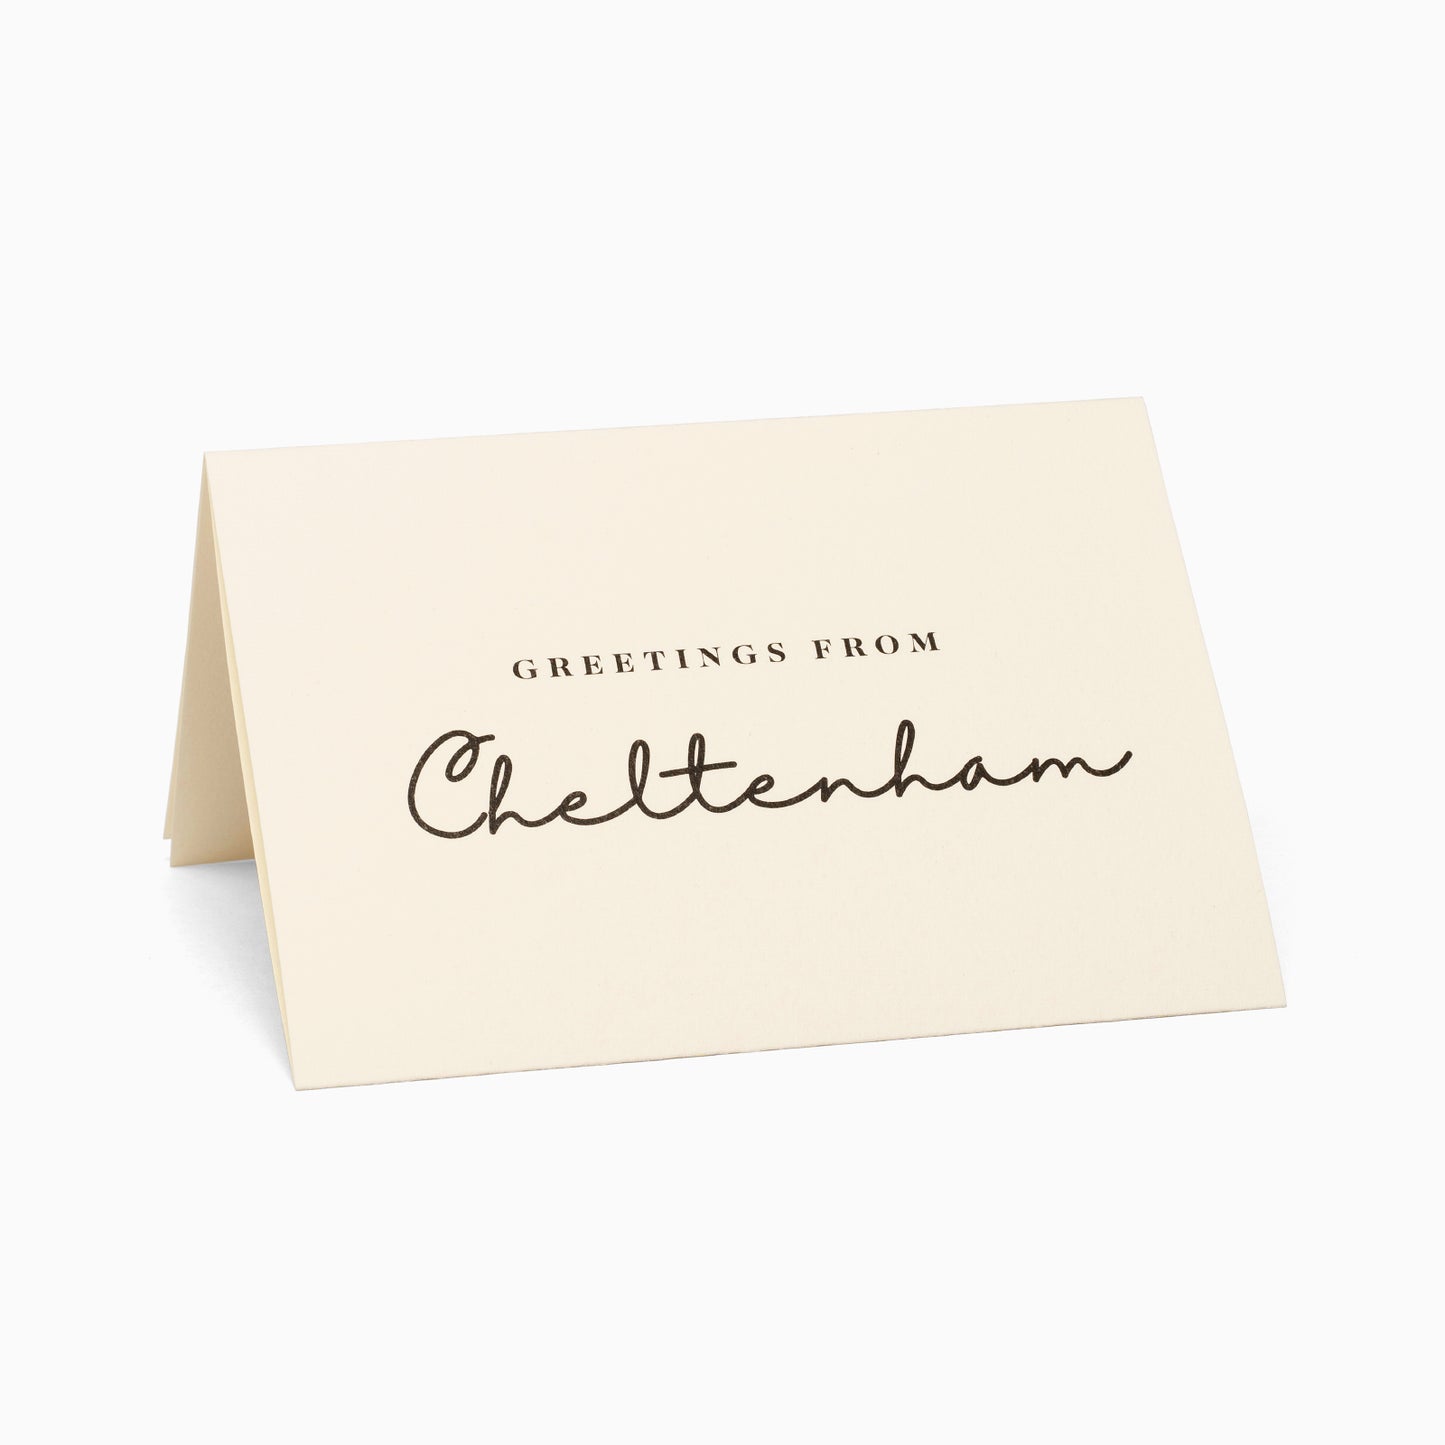 Greetings from Cheltenham Pittville Pump Room Pop-Up Card by PaperLandmarks